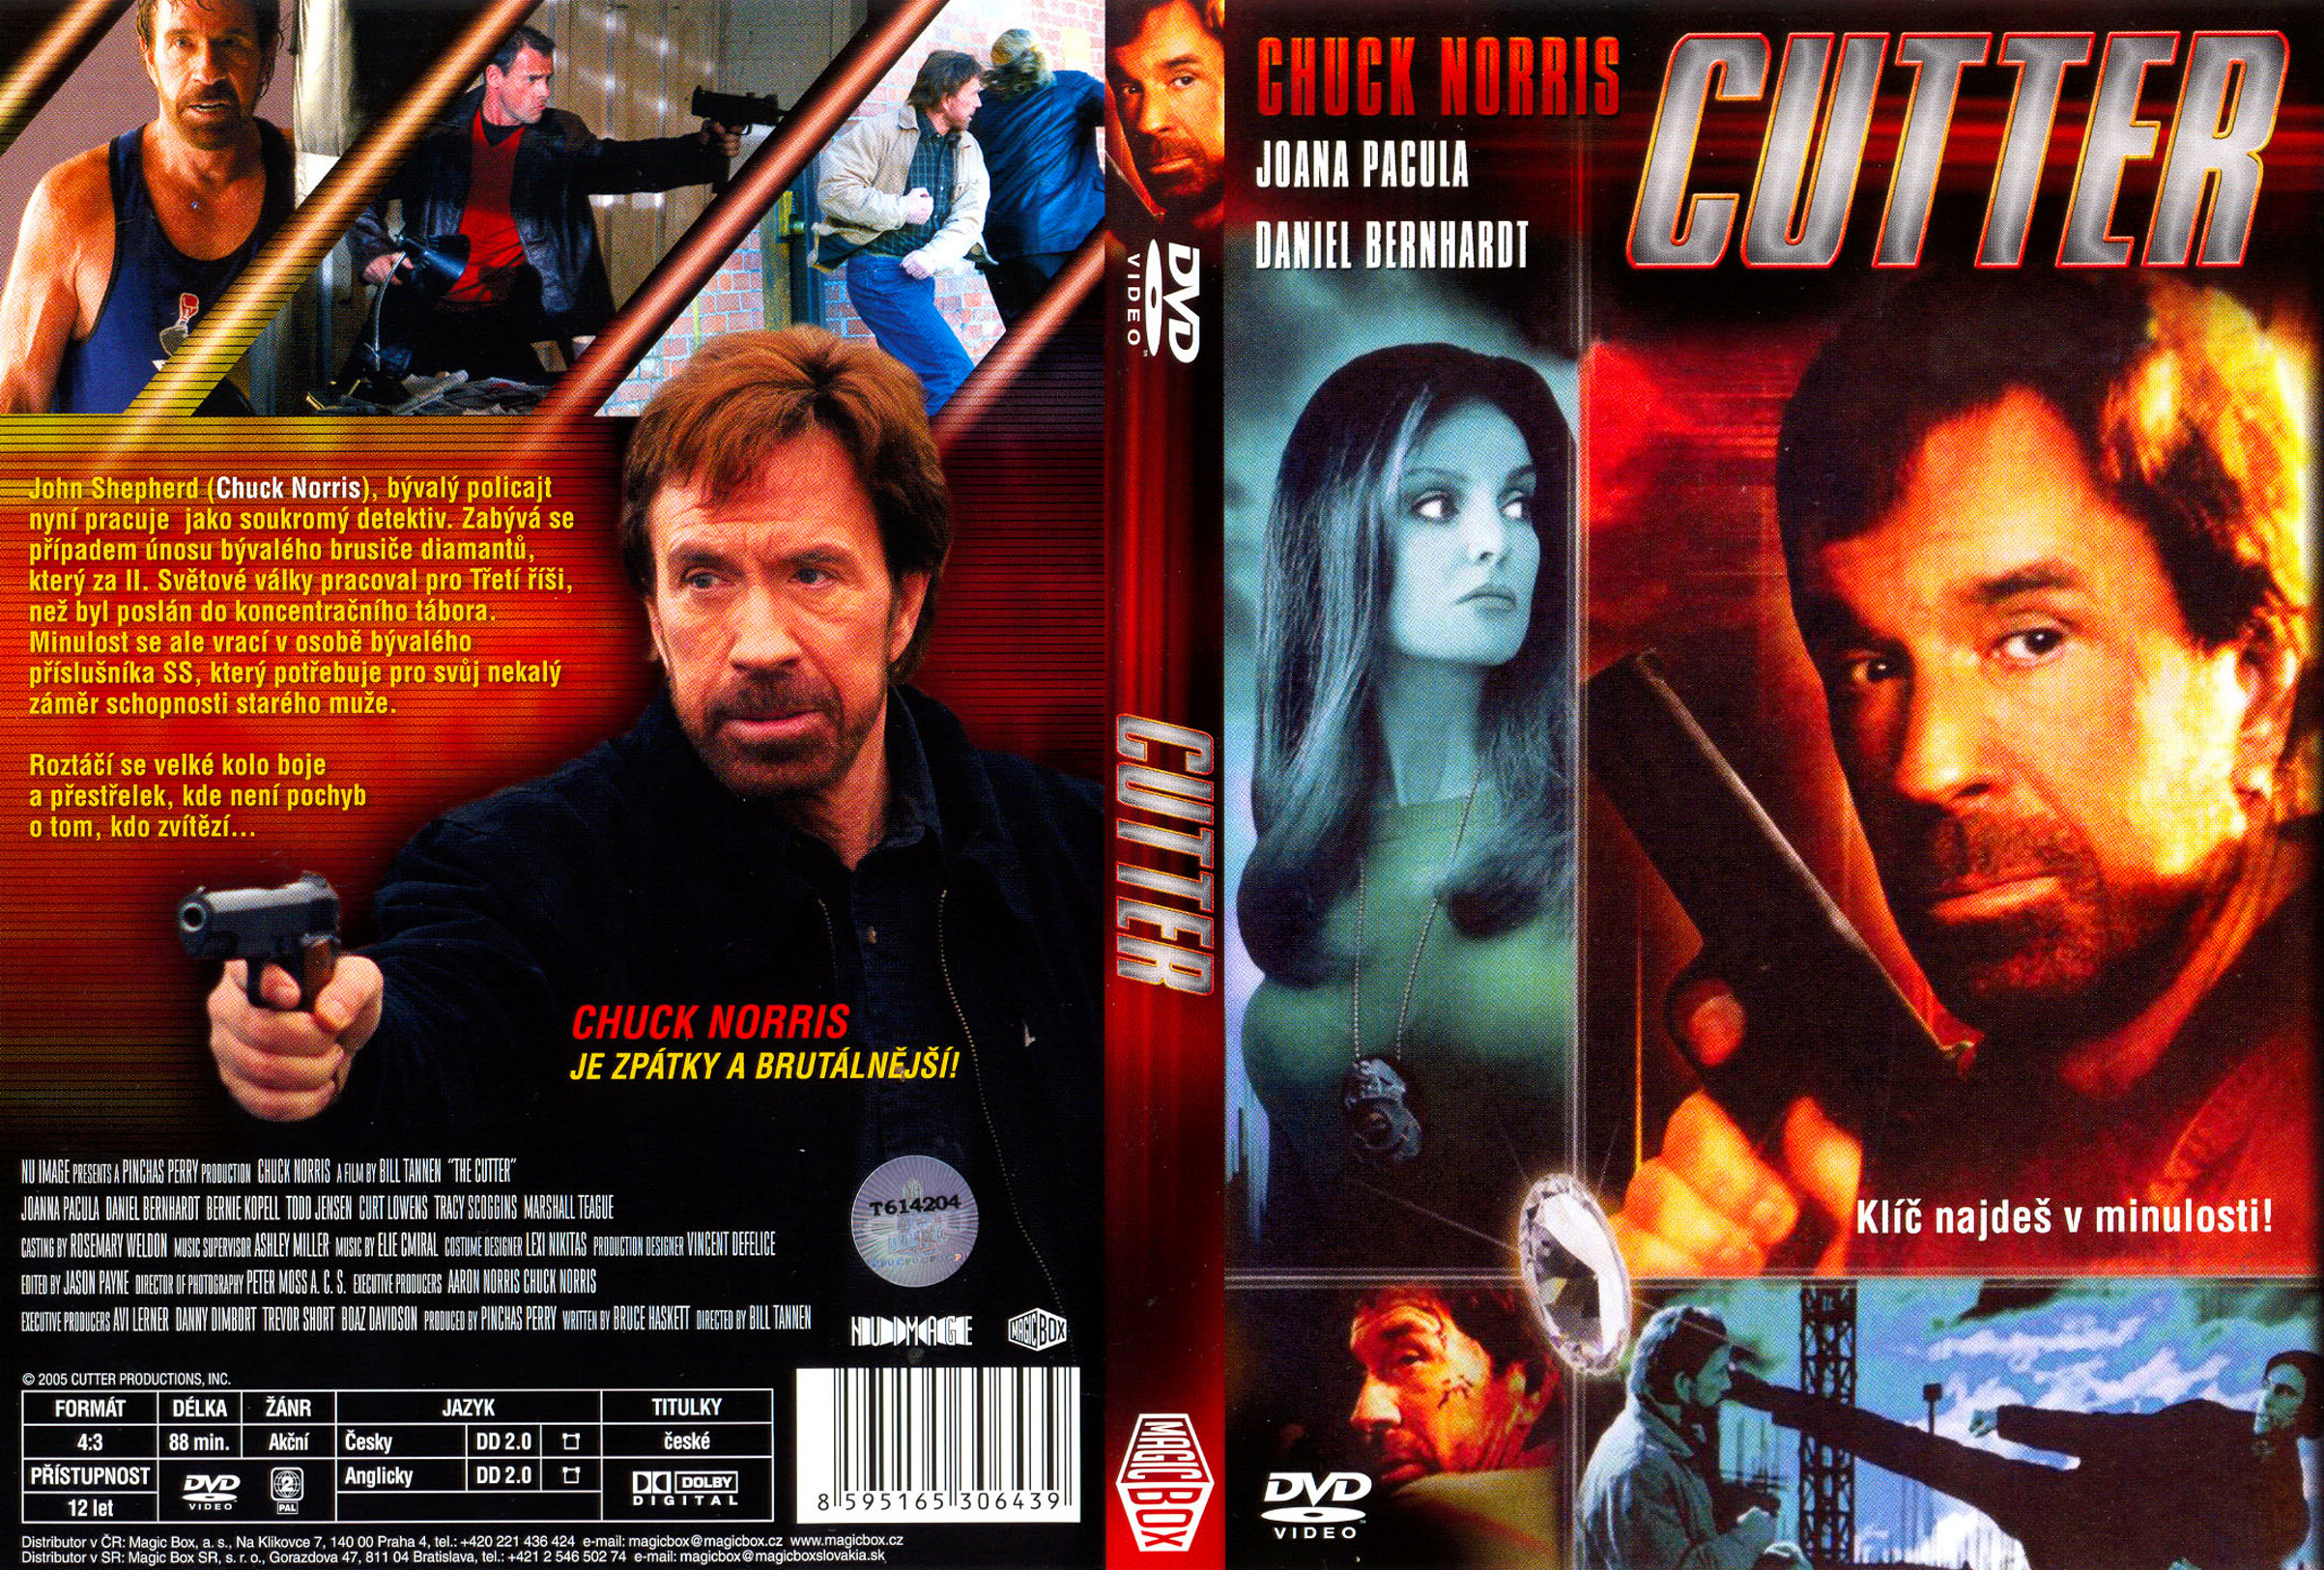 Chuck Norris Collectie DvD 9 The Cutter